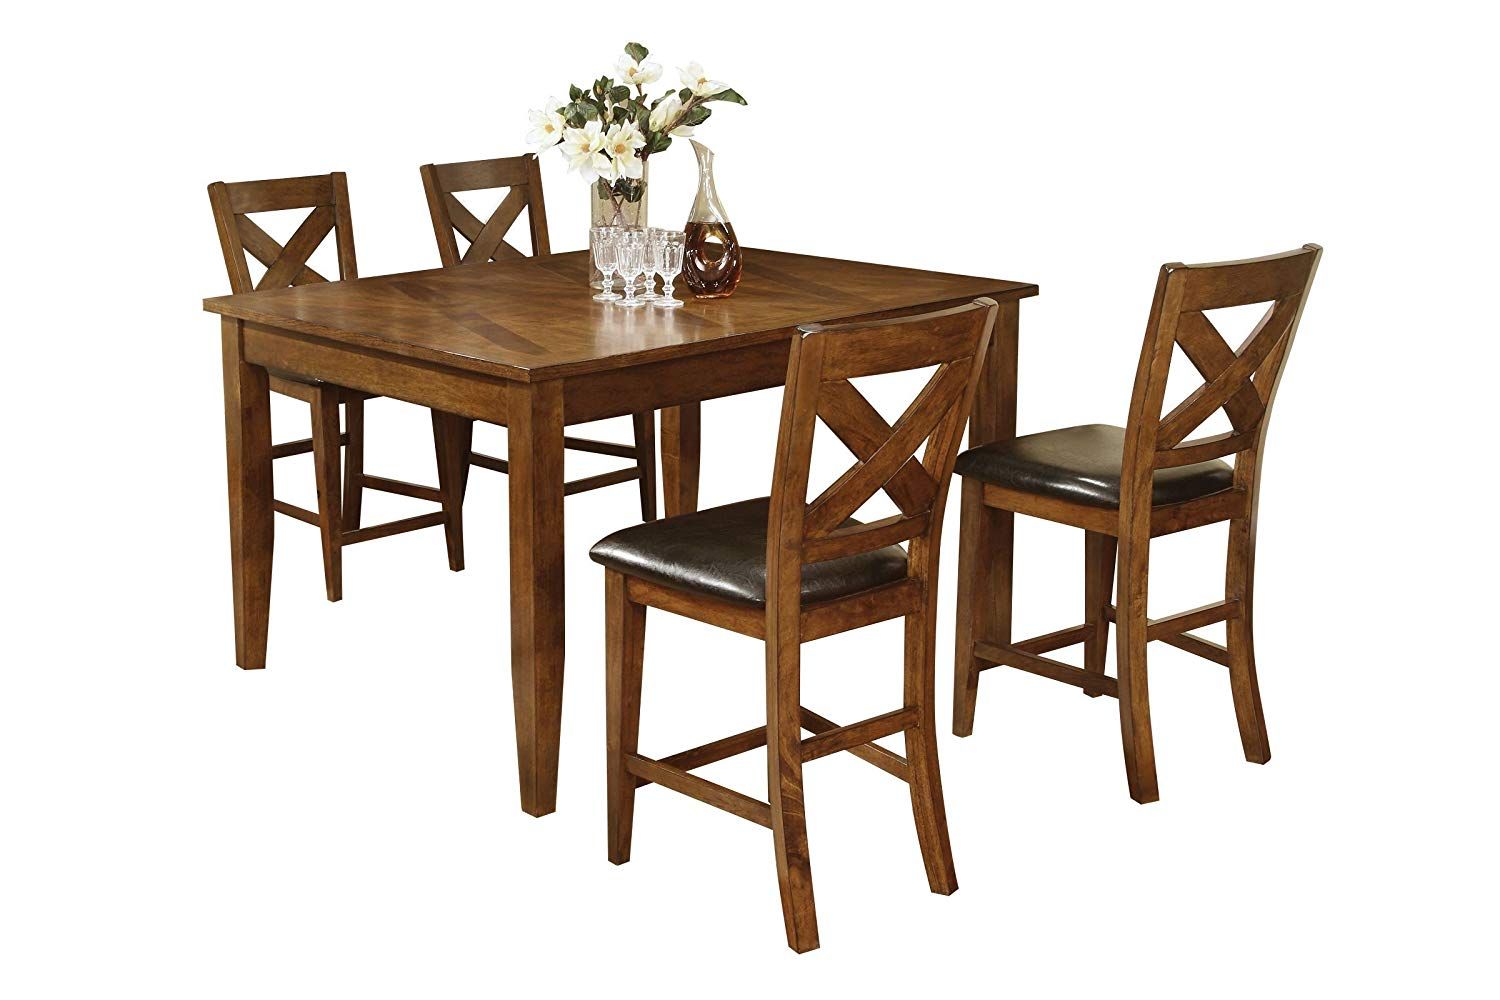 Kaya 3 Piece Dining Sets Intended For Current Cheap Pub Table White, Find Pub Table White Deals On Line At Alibaba (View 17 of 20)